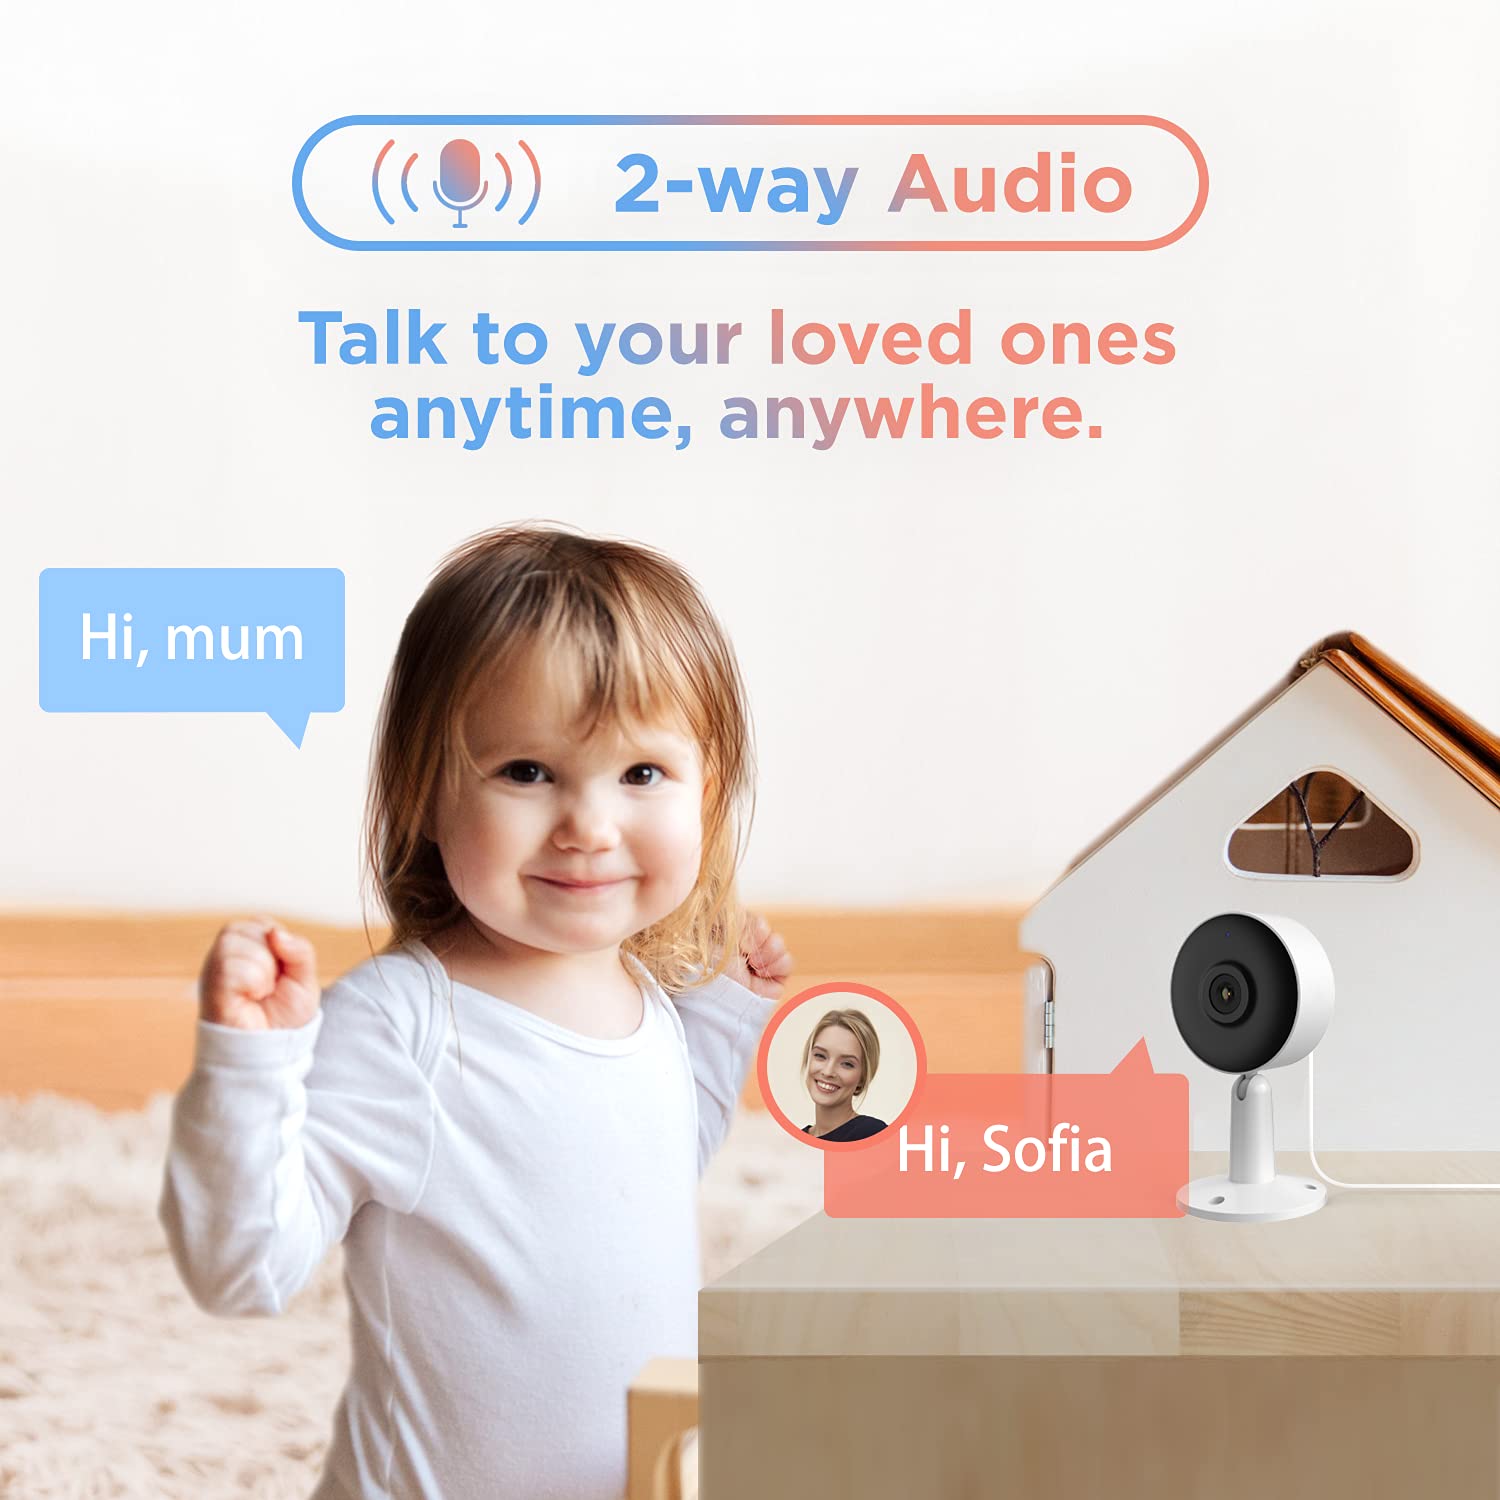 Arenti Smart WiFi Camera, 1080P Security IP Camera, Pet Baby/Nanny Indoor Surveillance Camera with Motion/Sound Detection, Night Vision, 2-Way Audio, Works with Alexa and Google Assistant